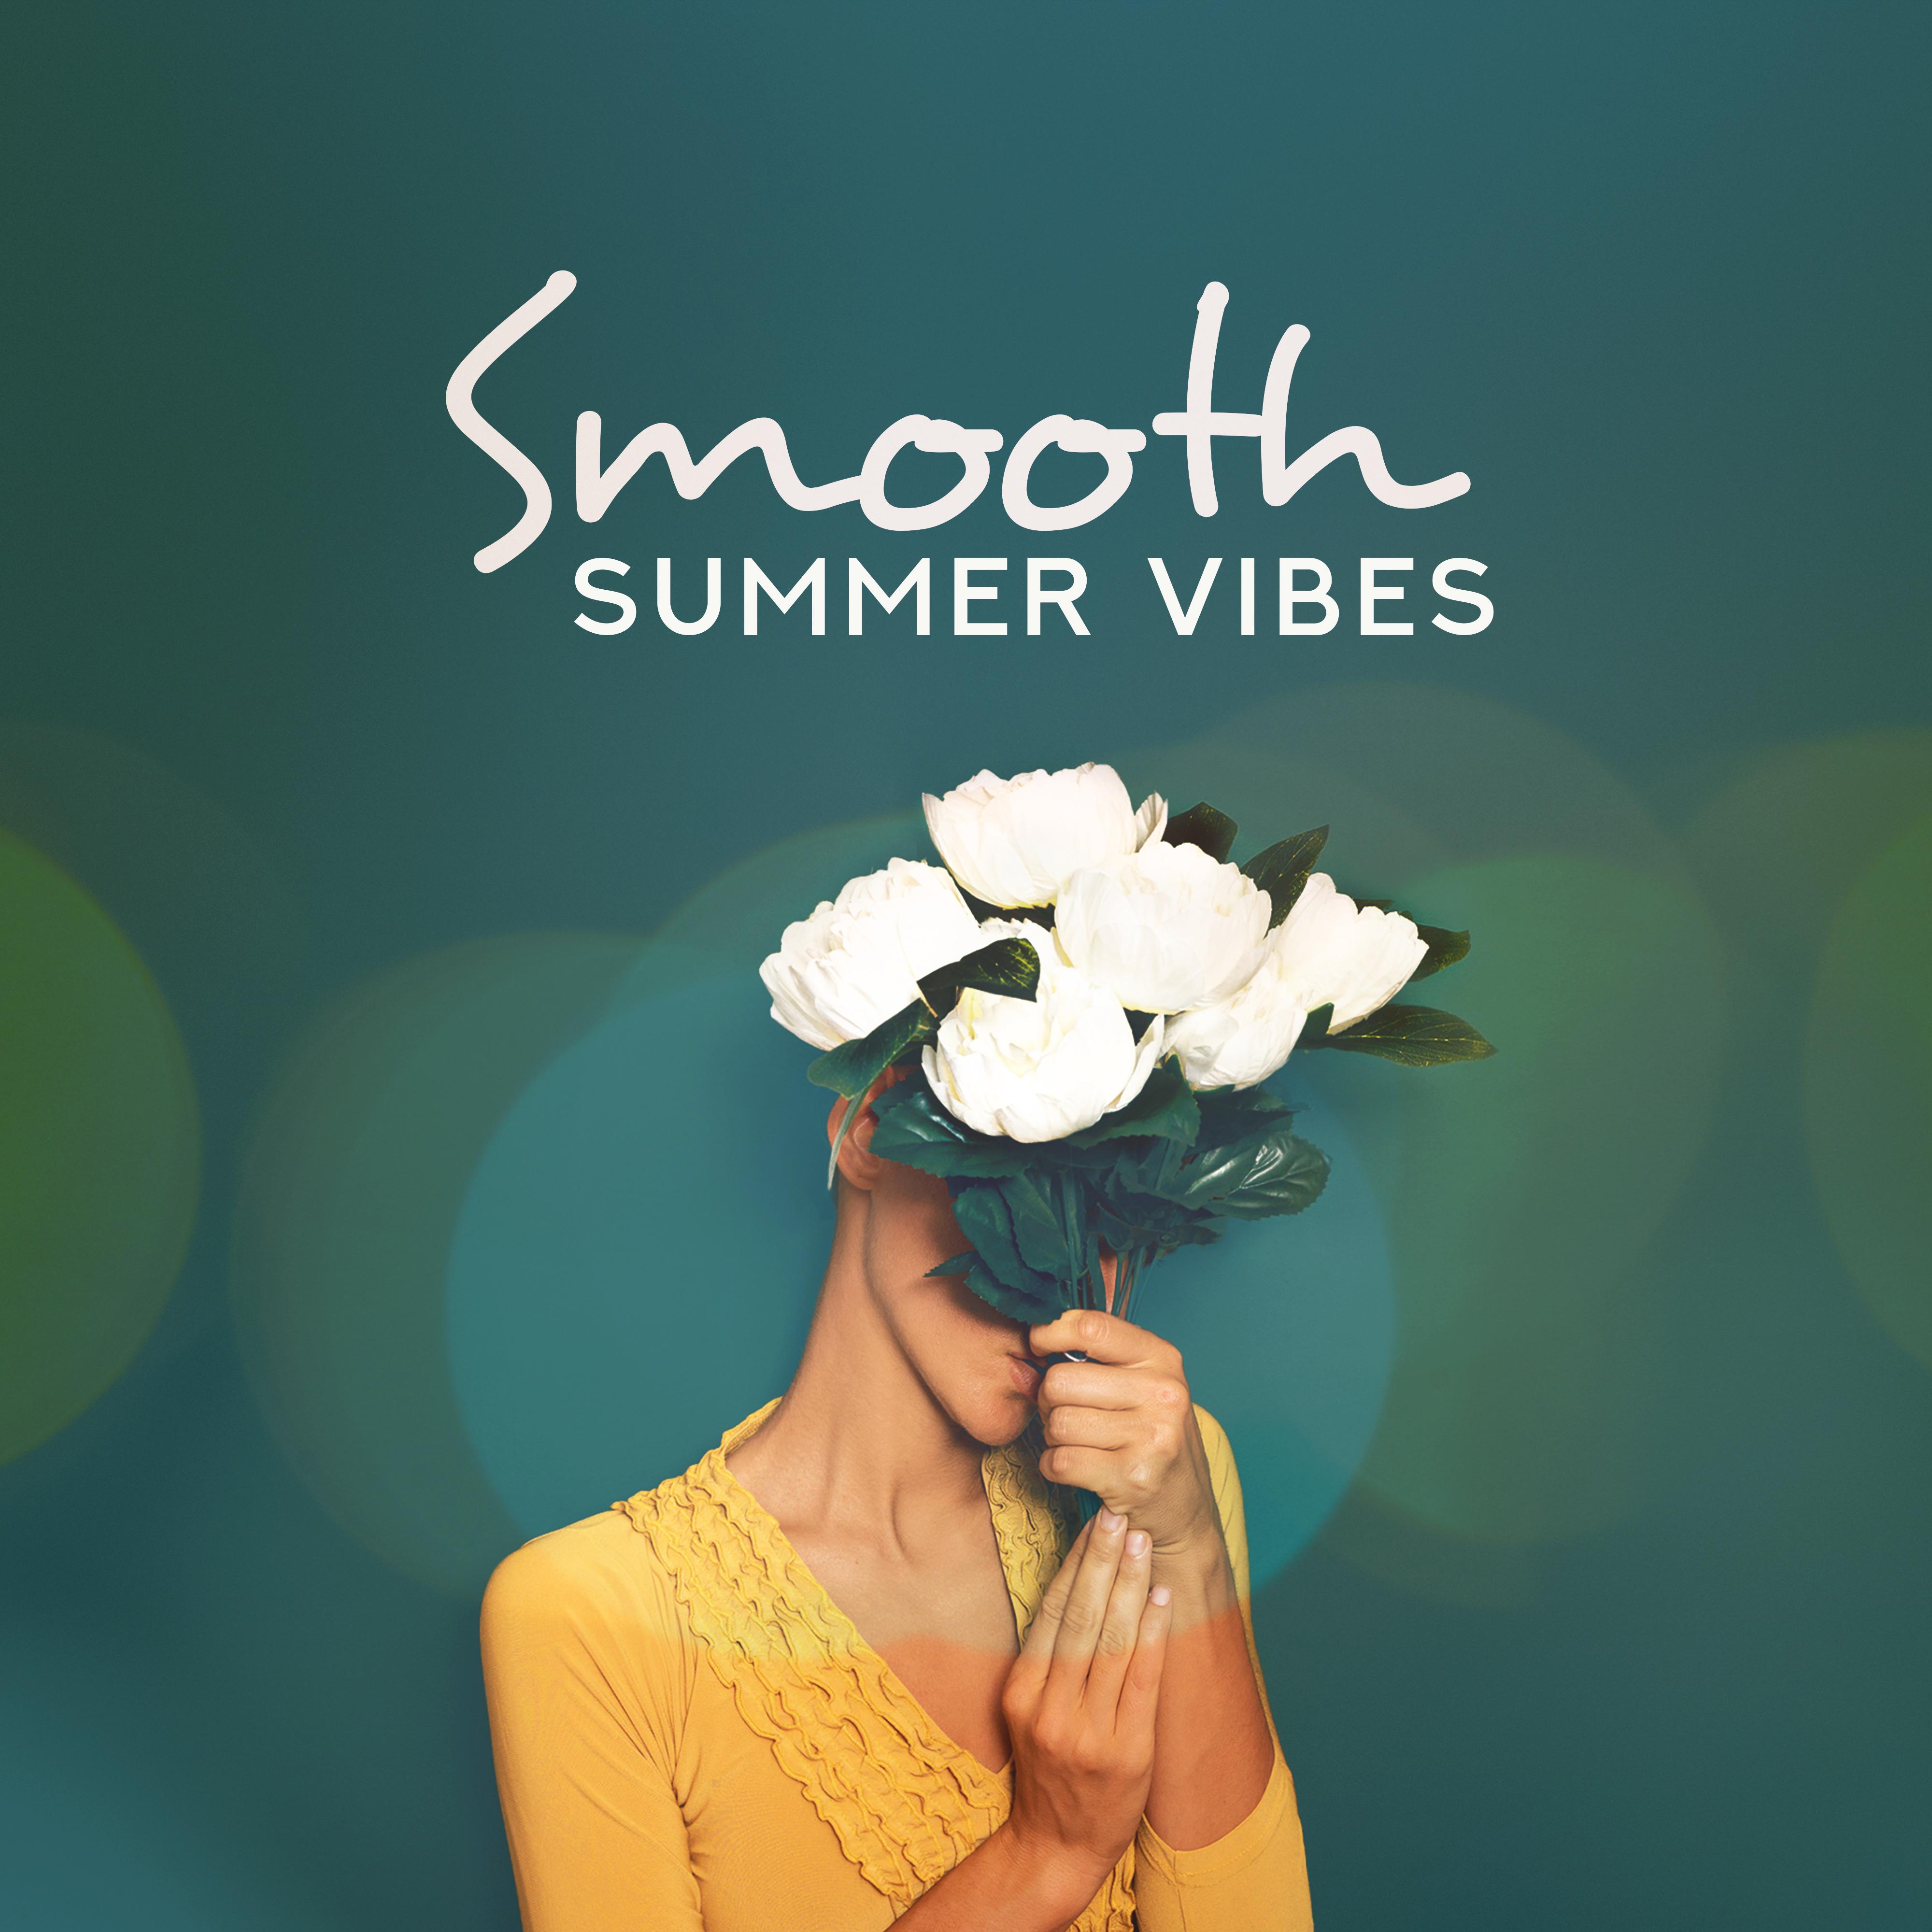 Smooth Summer Vibes – Summer Songs for Relaxation, Rest, Sleep, Relaxing Chill Out, Zero Stress, Chillout Ambient Mix, Ibiza 2019